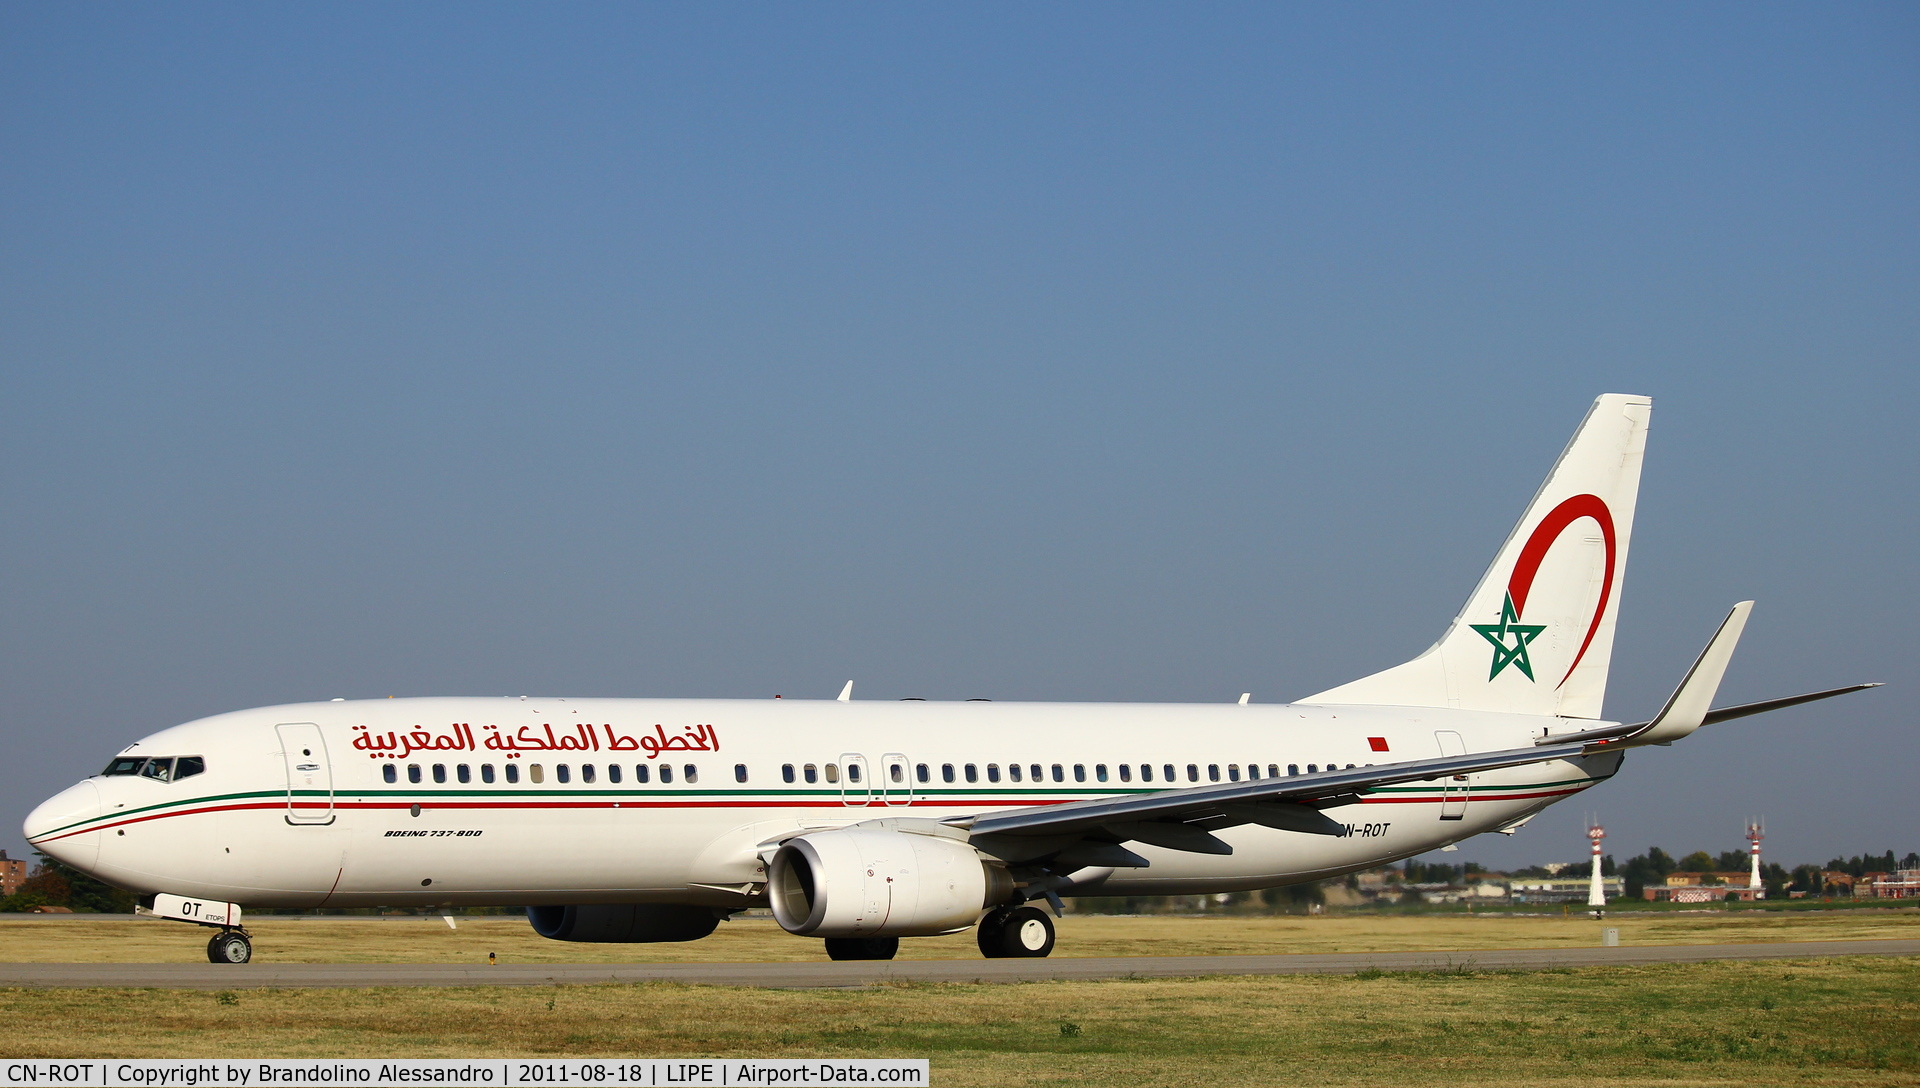 CN-ROT, 2009 Boeing 737-8B6 C/N 33068, Bologna G.Marconi Airport